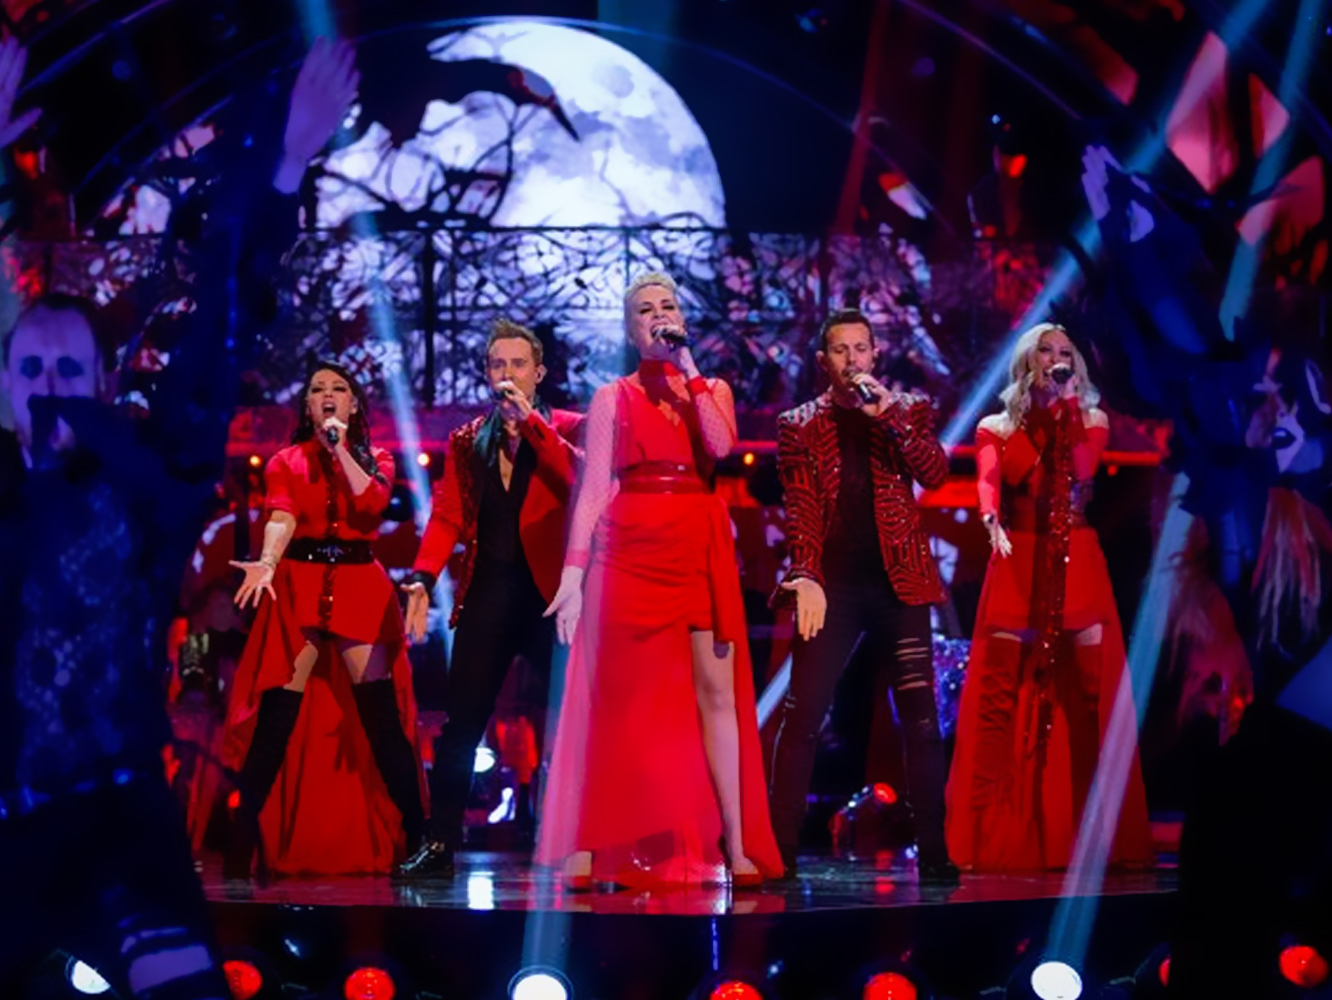  Steps celebraron Halloween en ‘Strictly Come Dancing’ con ‘Scared Of The Dark’